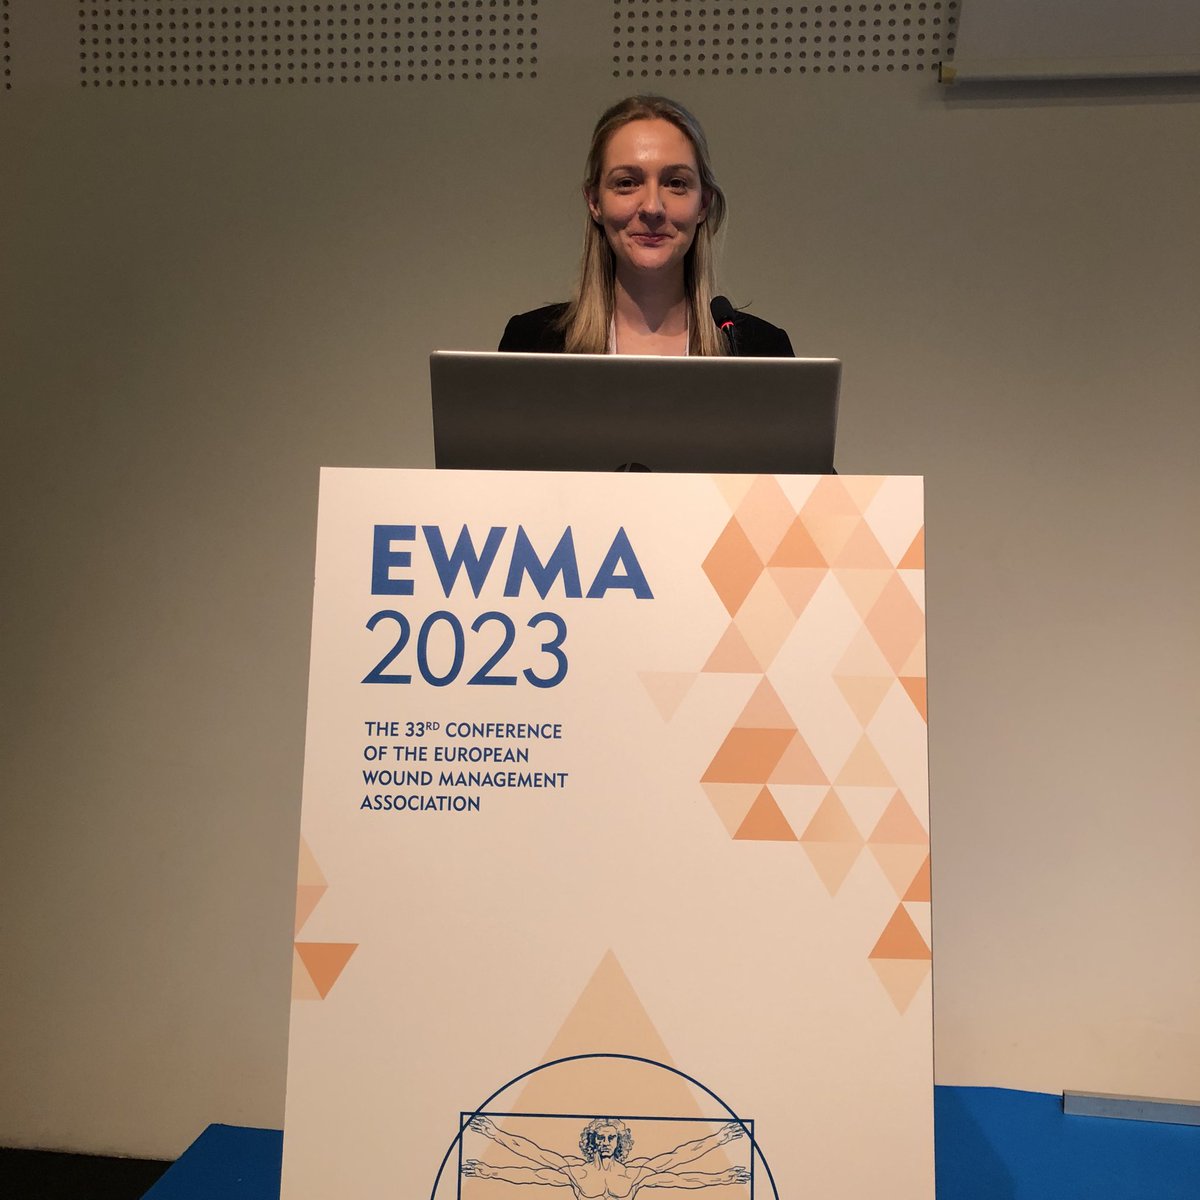 Dr Georgia Tobiano sharing her expertise in engaging patients as research co-investigators as an invited EWMA conference presenter. Our CRE in Wiser Wound Care are so proud!